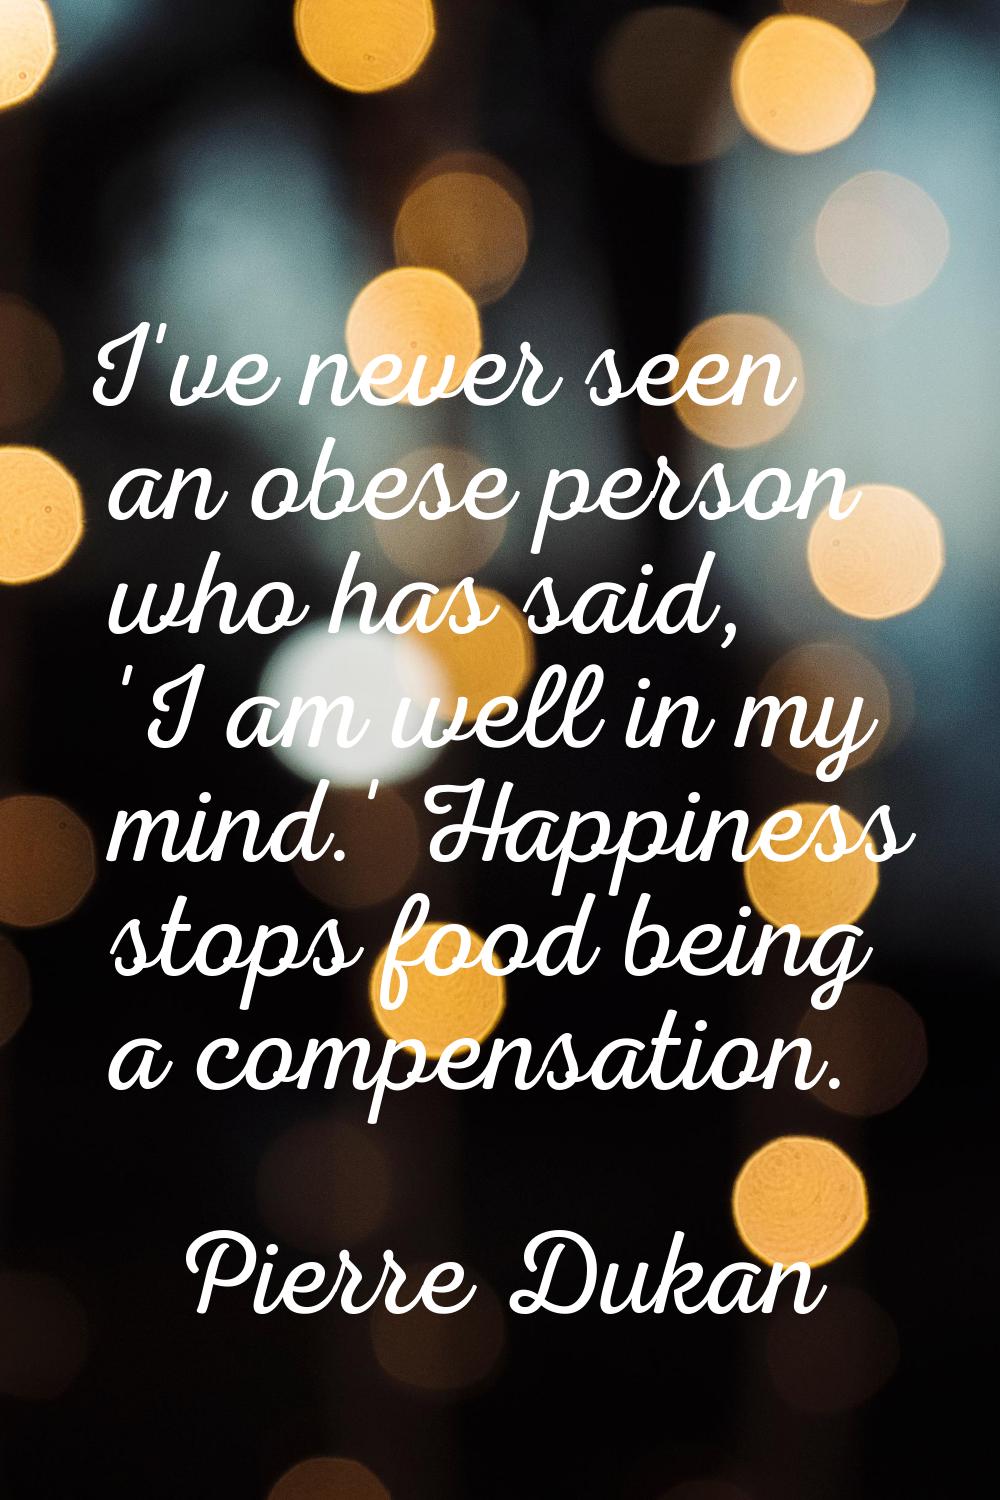 I've never seen an obese person who has said, 'I am well in my mind.' Happiness stops food being a 